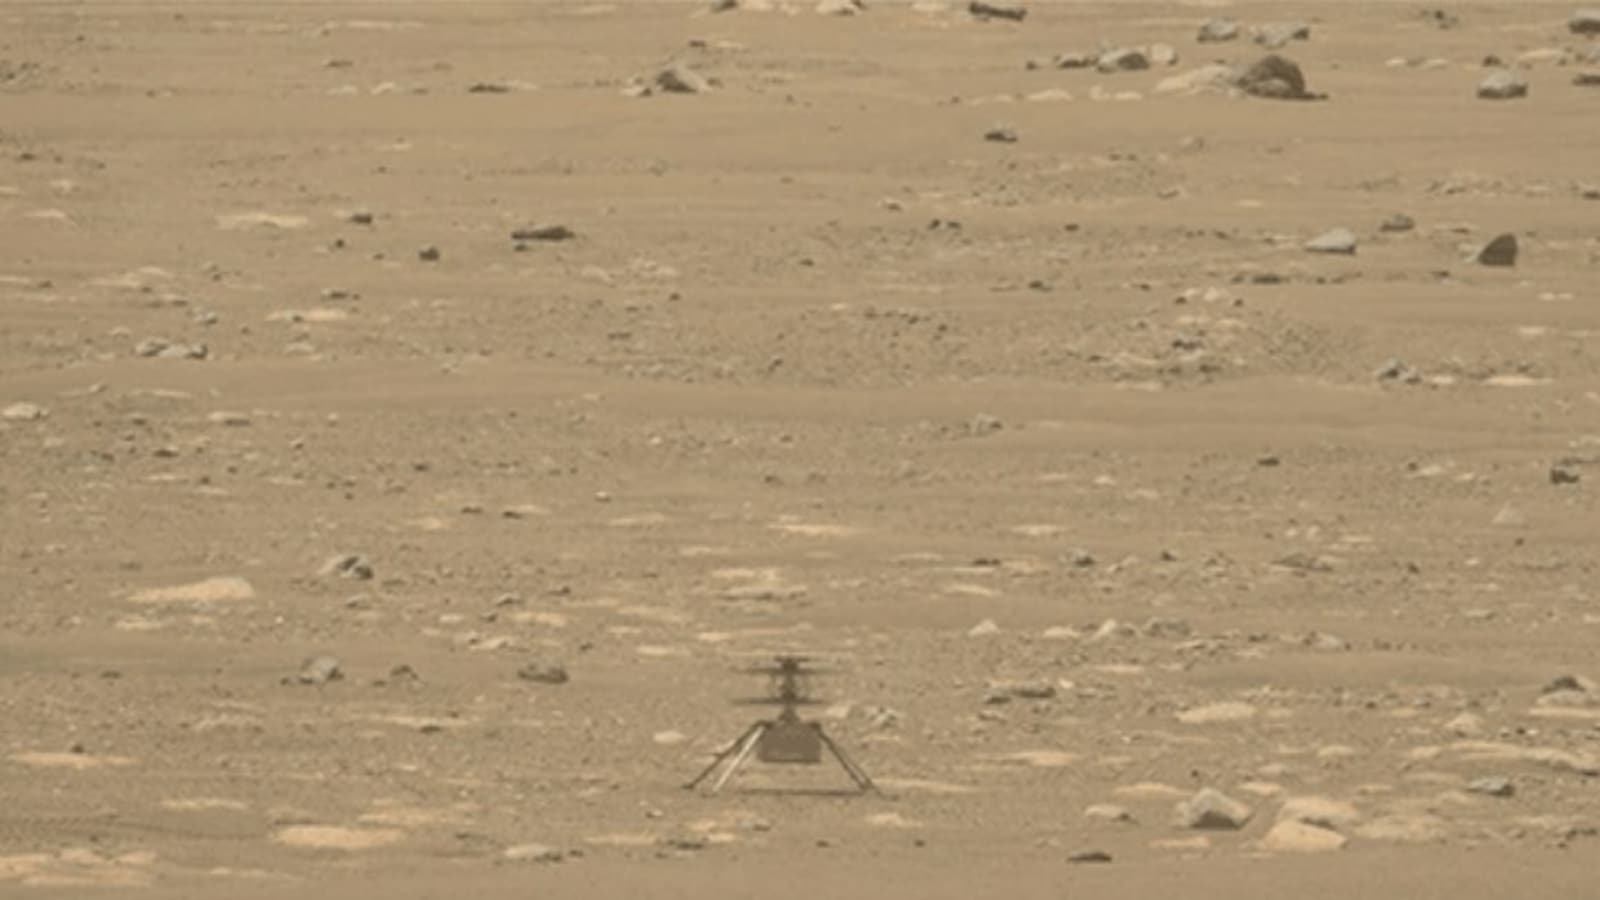 STRANGE! NASA finds suspicious object stuck to foot of Mars helicopter |  Tech News